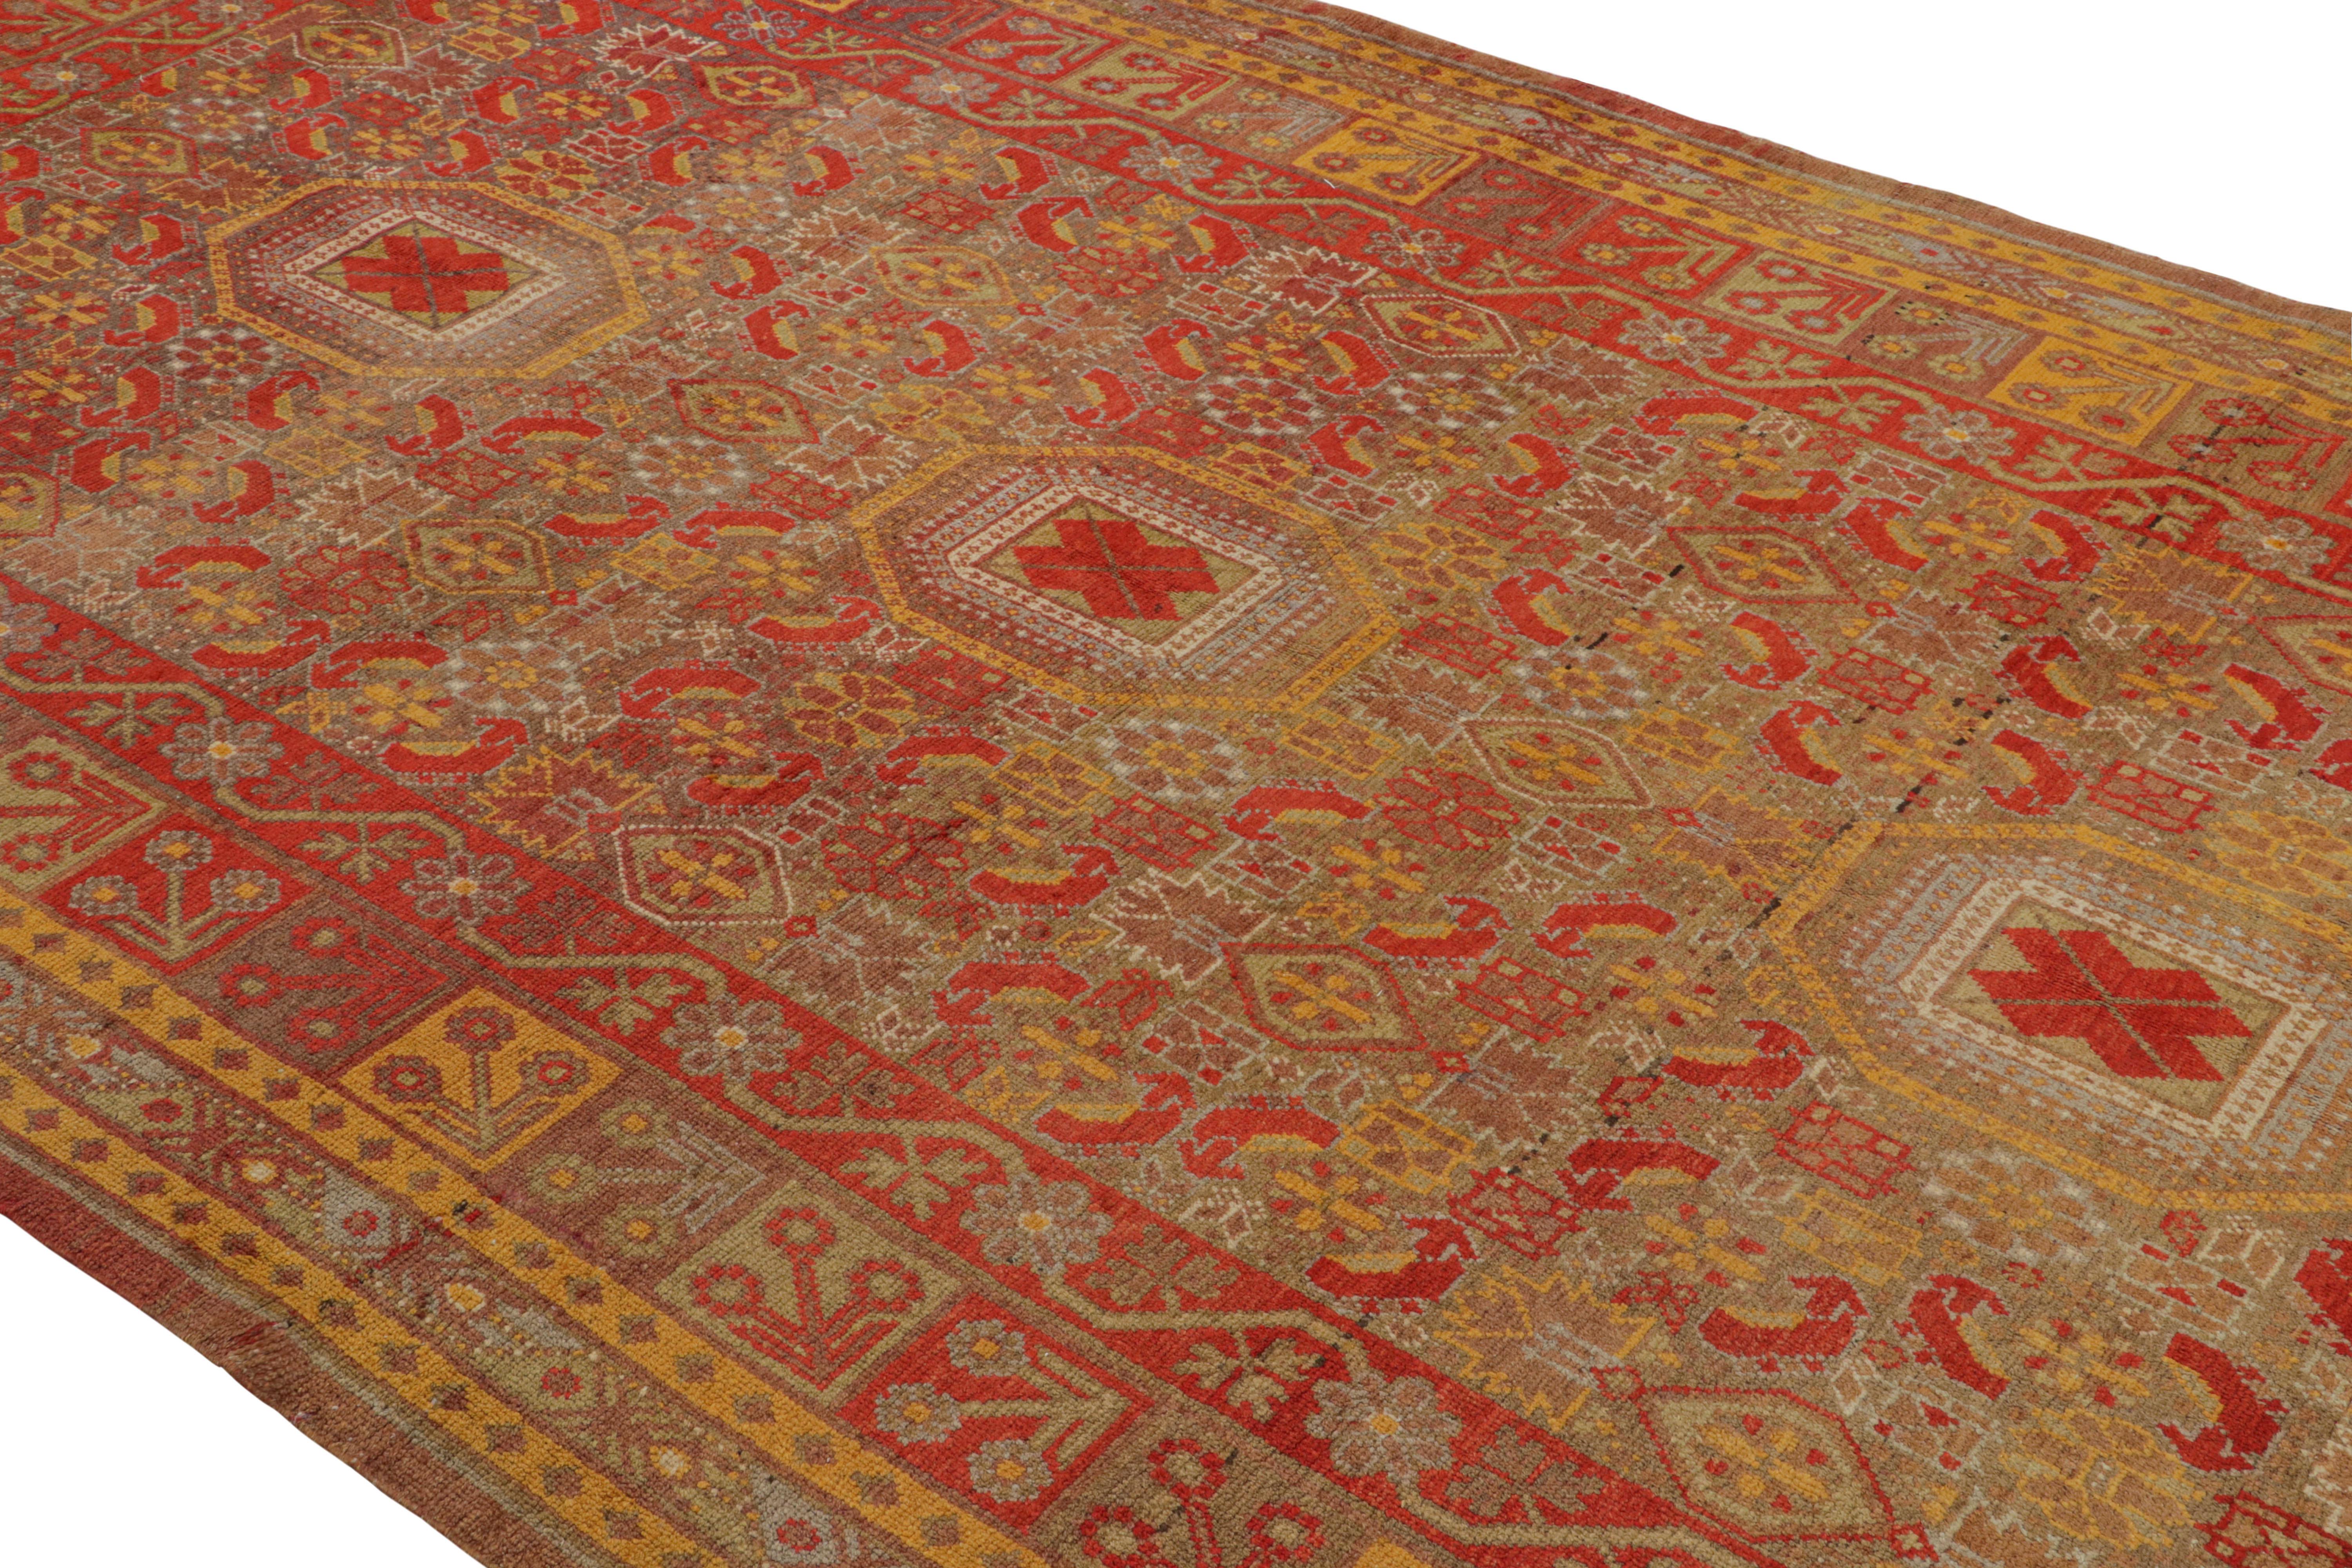 Hand knotted in wool originating from East Turkestan circa 1890-1900, this antique rug connotes a classic Khotan rug design with a classic approach to transitional colorway celebrated in this oriental rug family. This piece was selected in no small